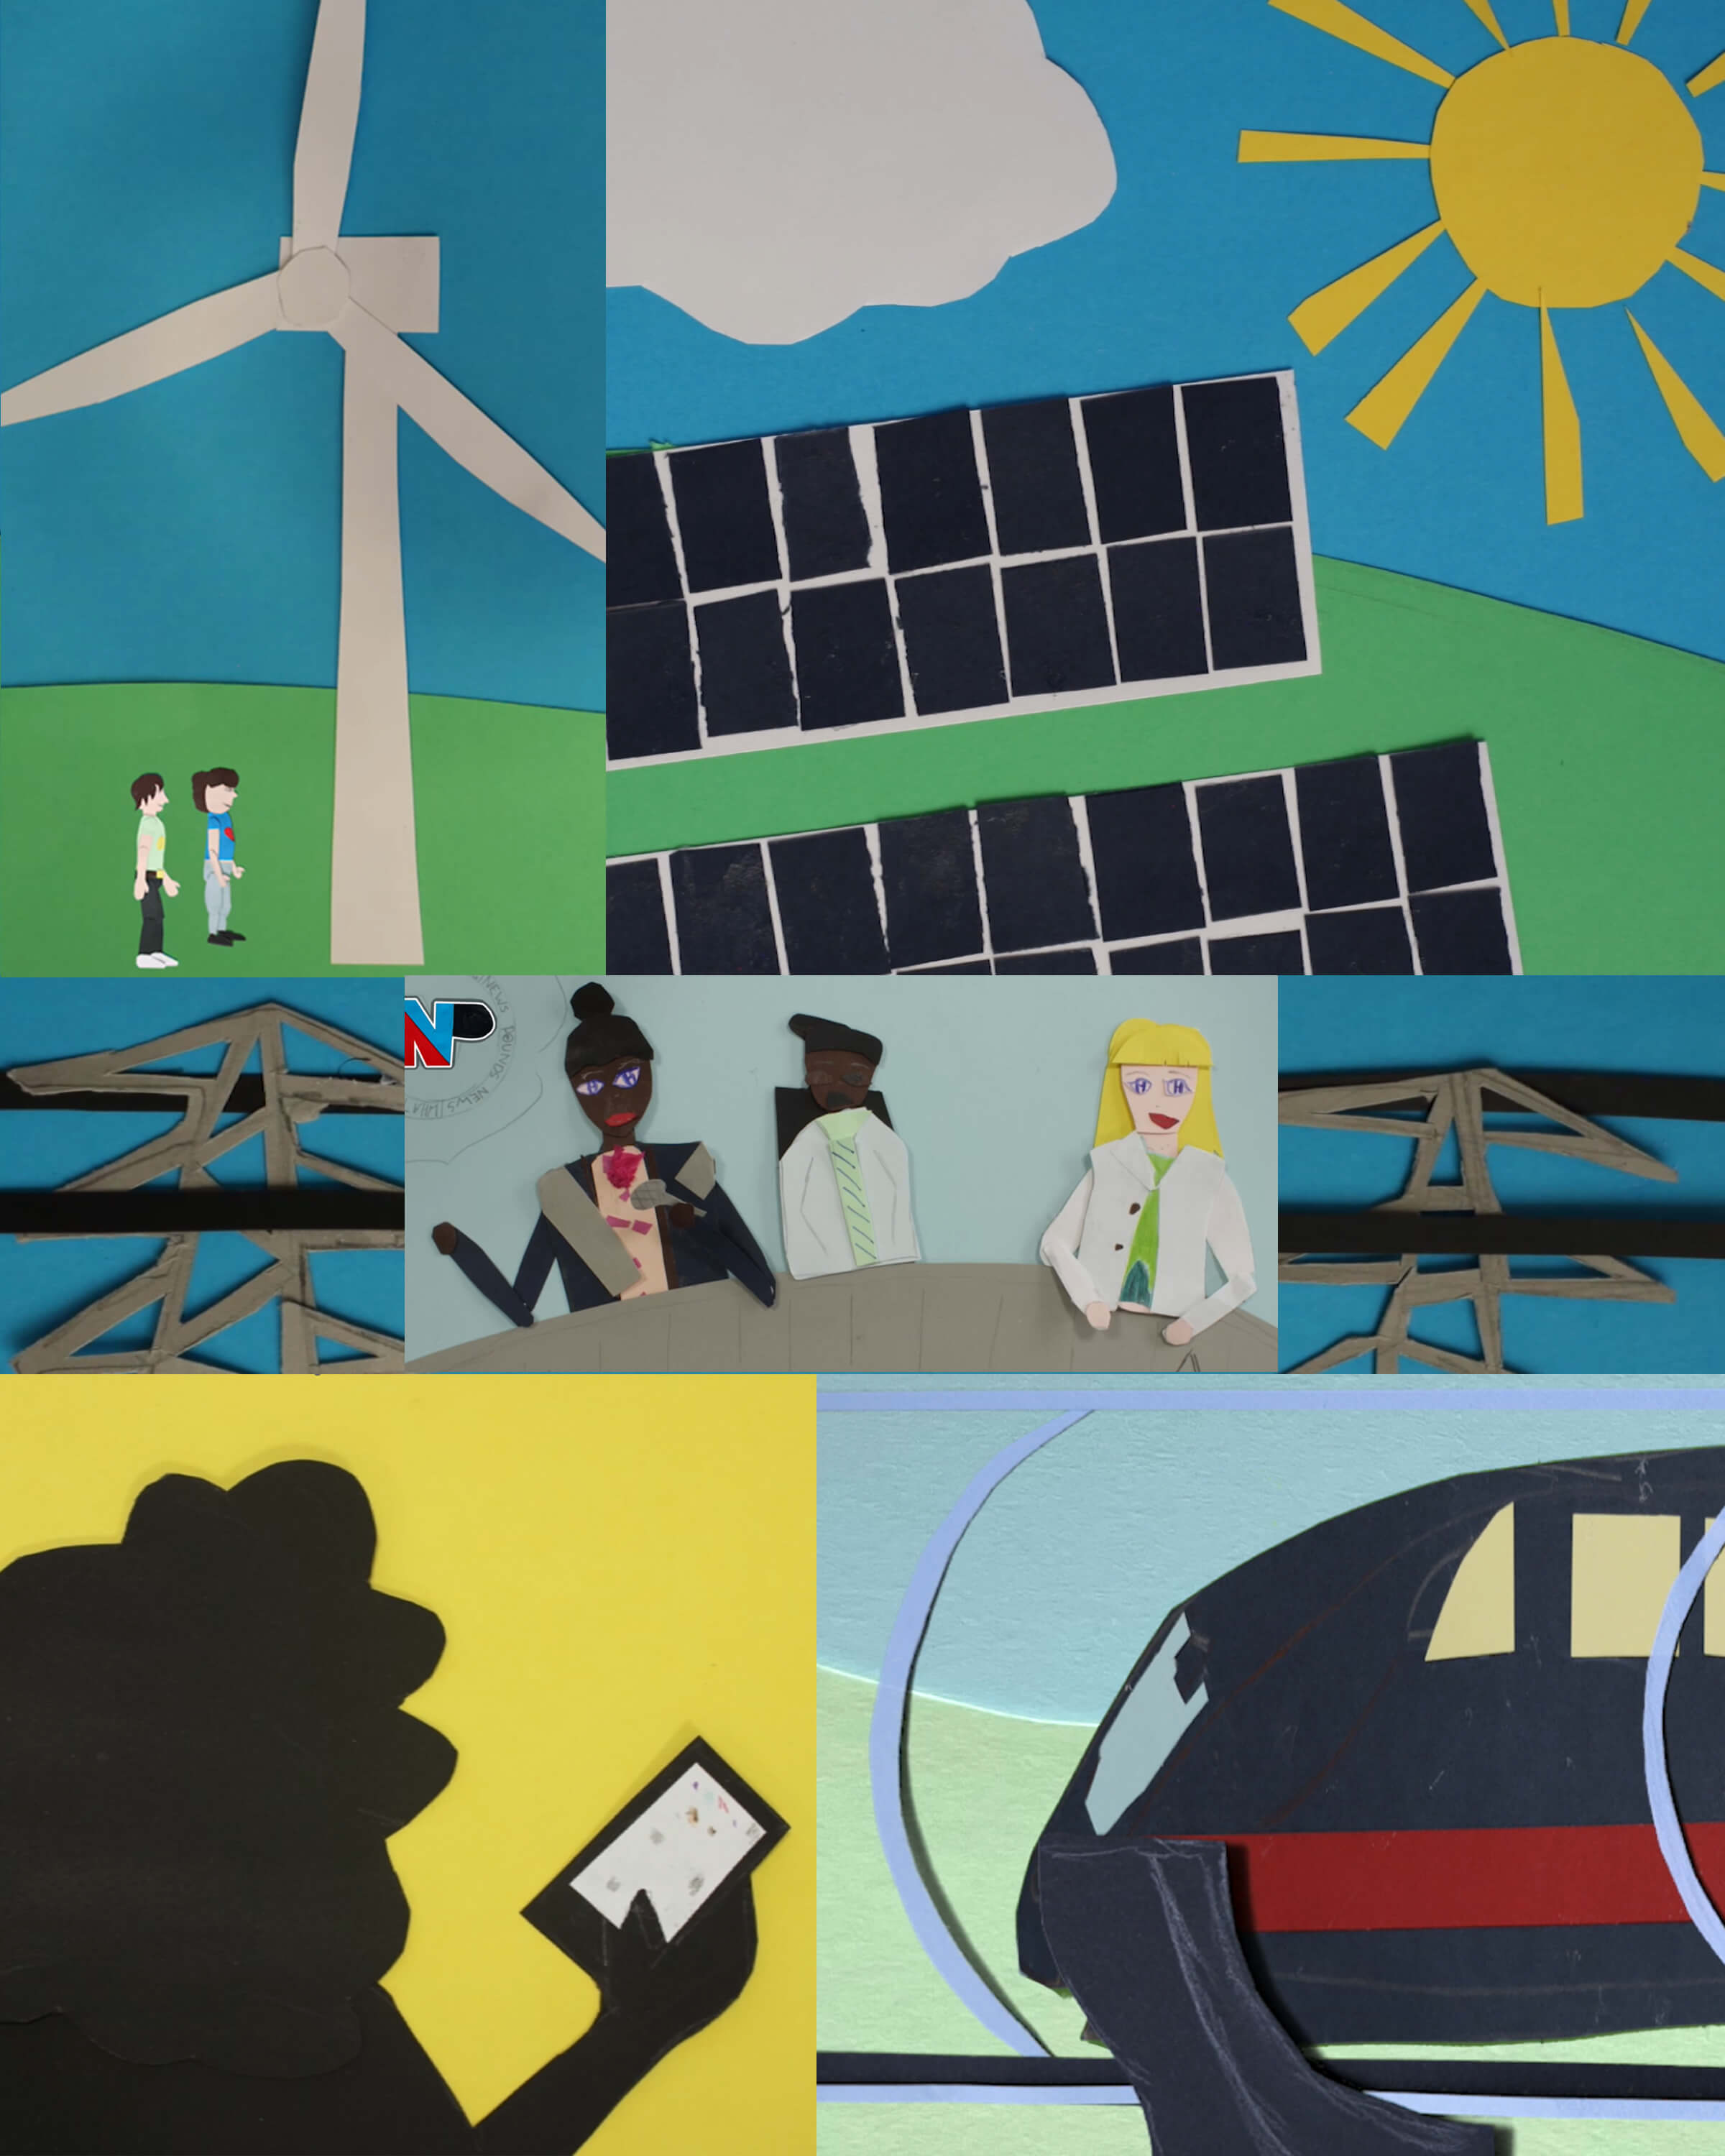 Animated pictures made from paper cutouts showing scenes with wind turbines and solar panels,